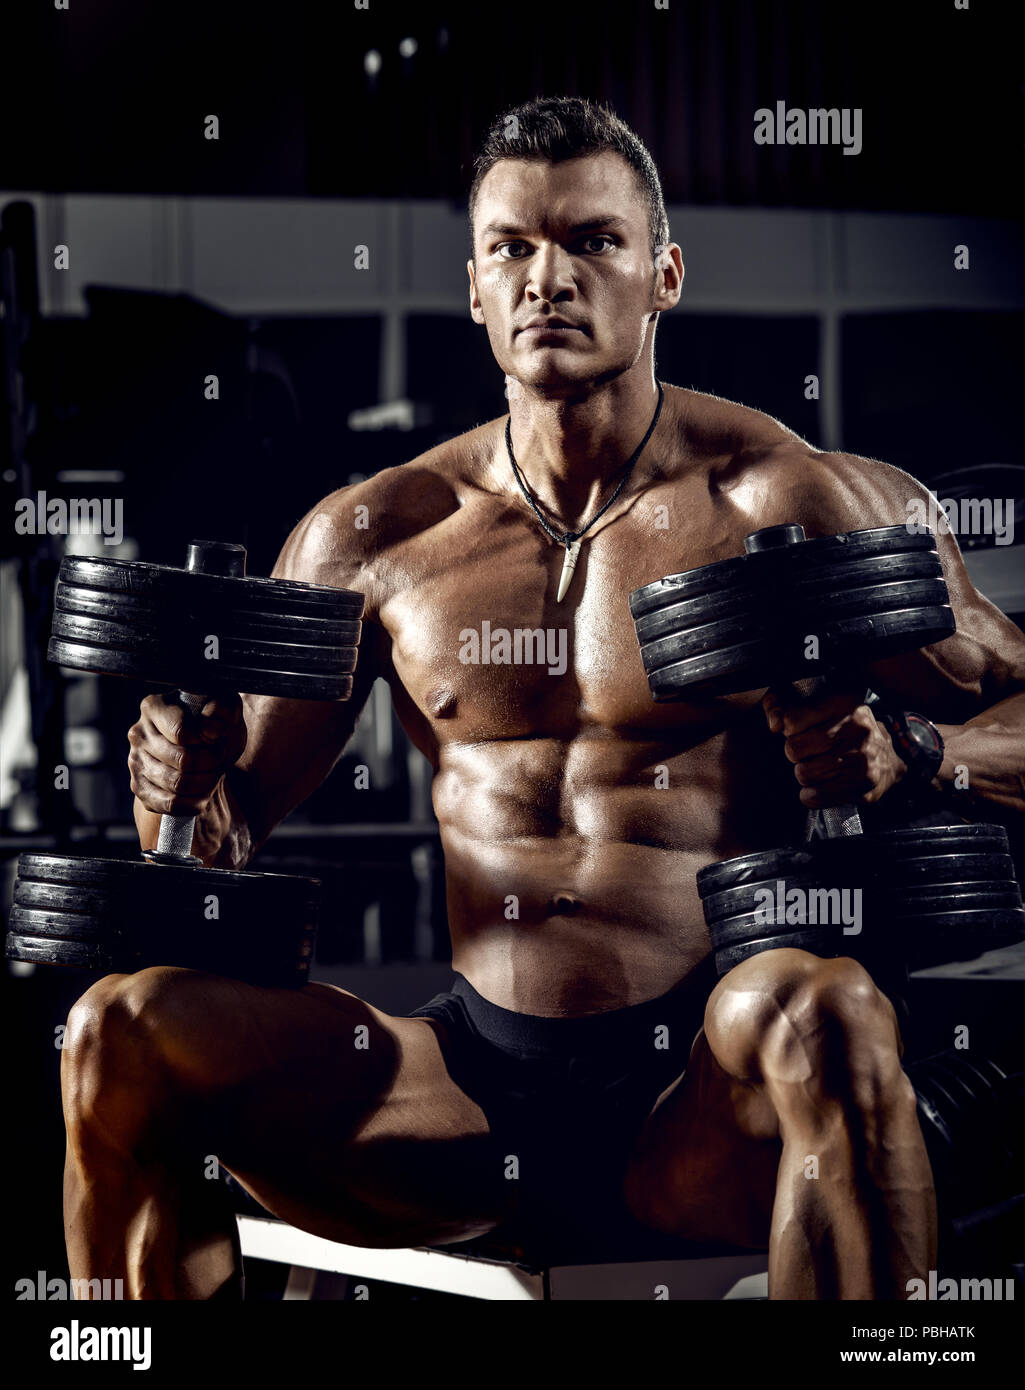 very power guy - bodybuilder, execute exercise with weight, inside gym, vertical photo Stock Photo